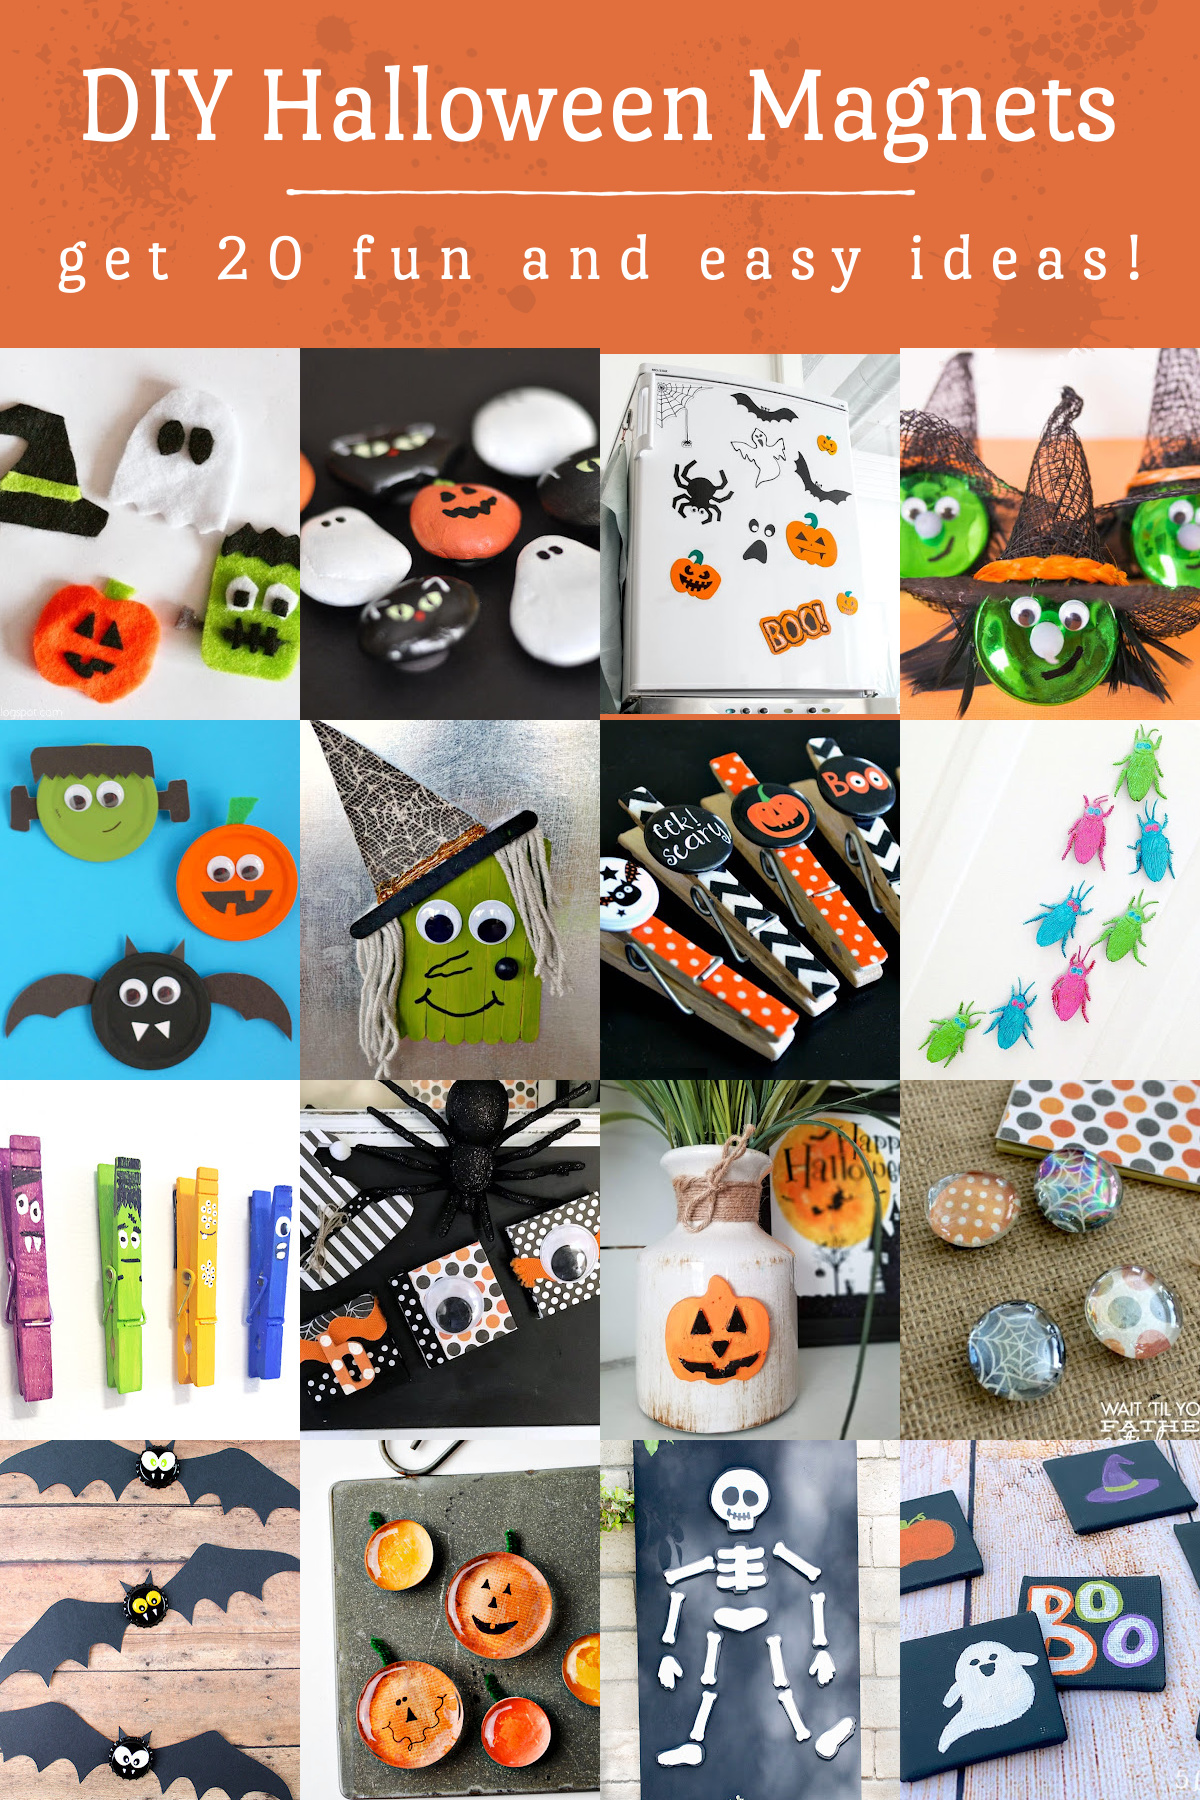 DIY Halloween Magnets for the Holiday